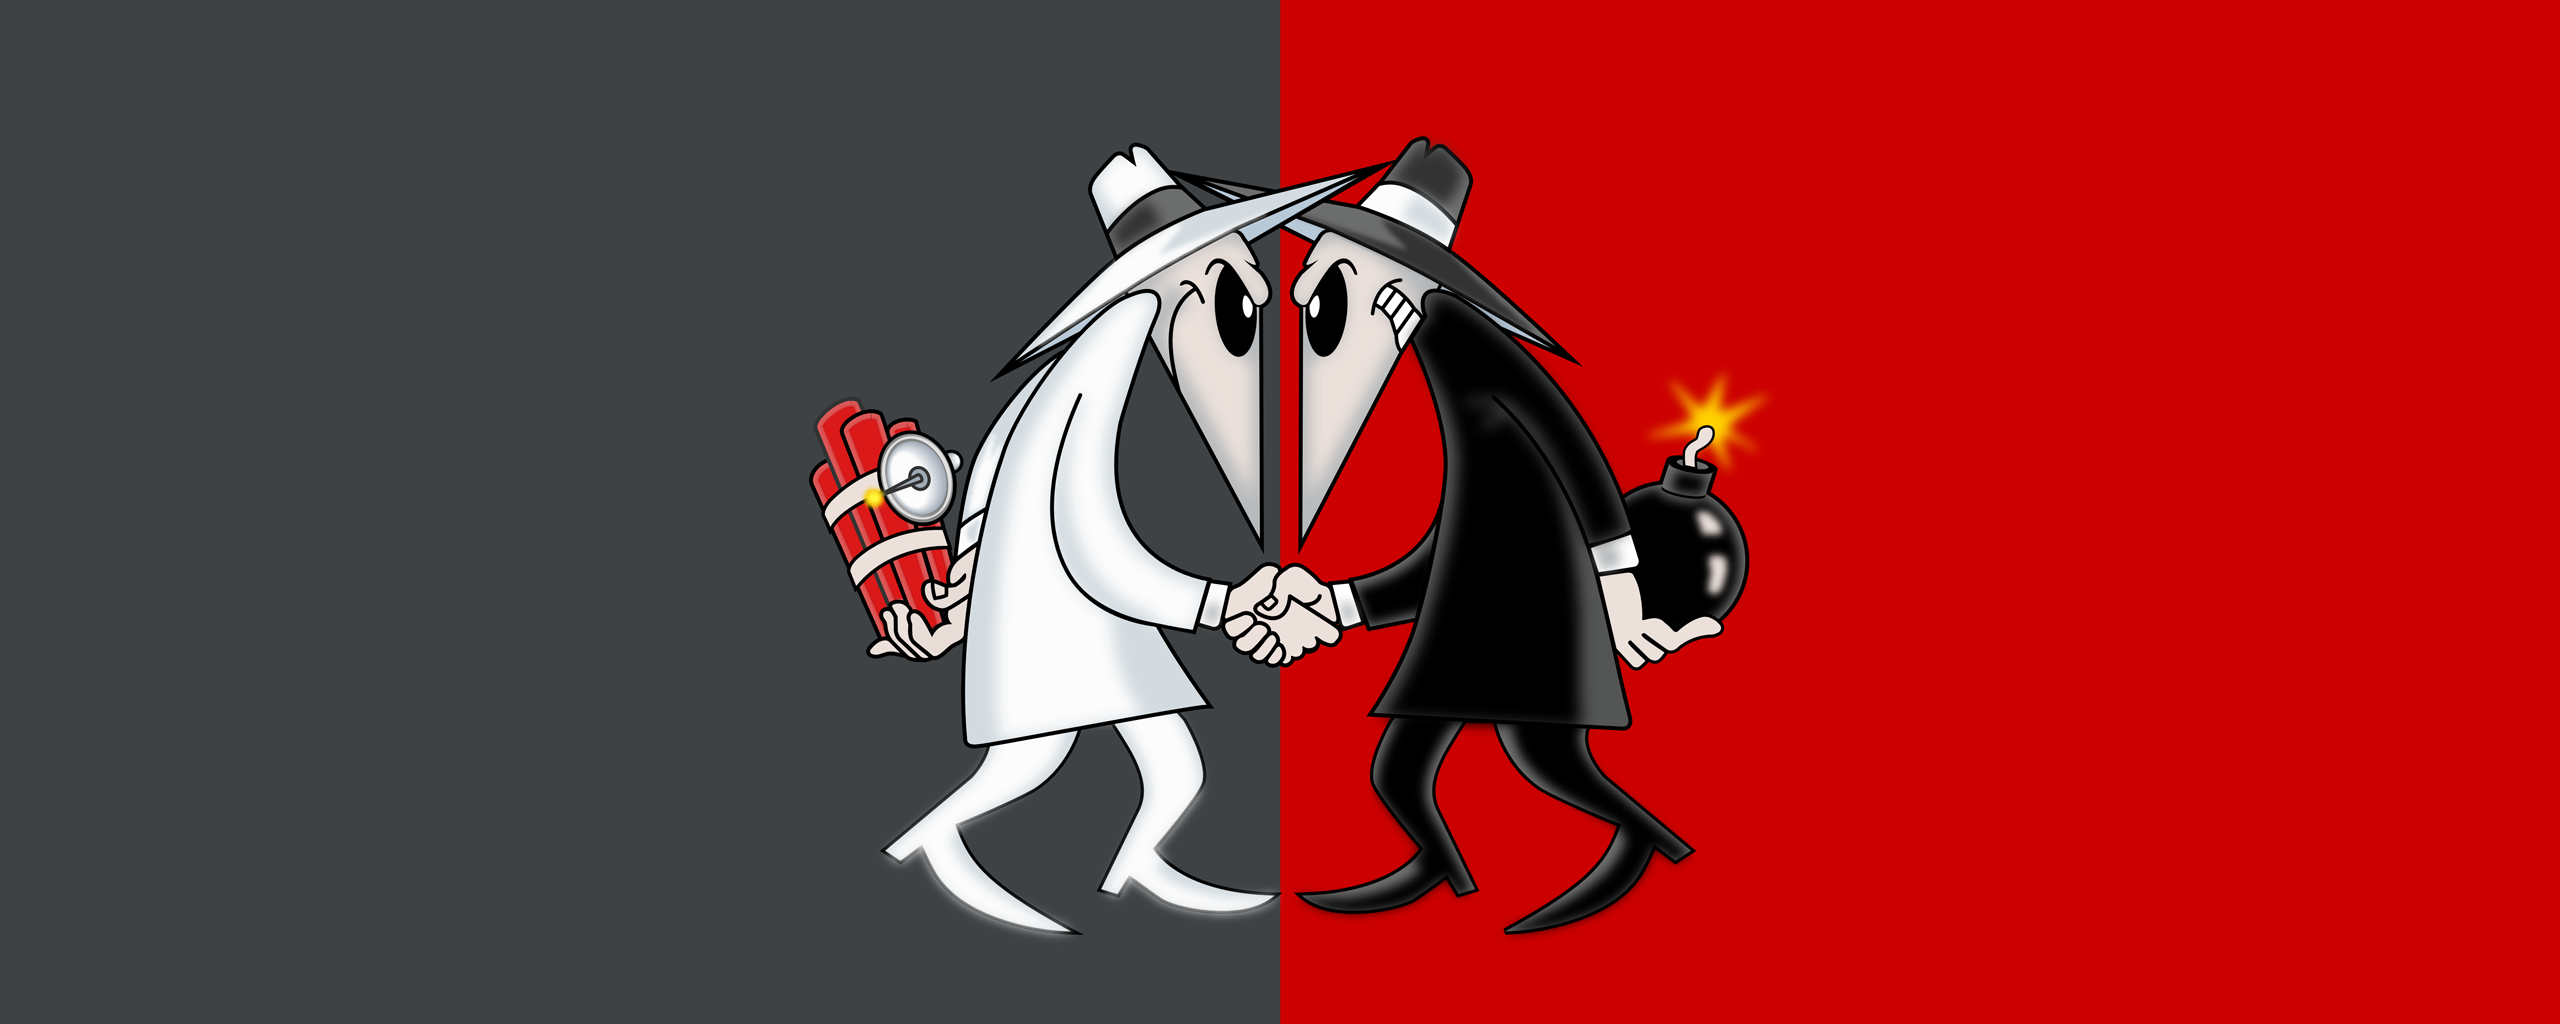 Spy Vs. Spy HD Wallpapers and Backgrounds